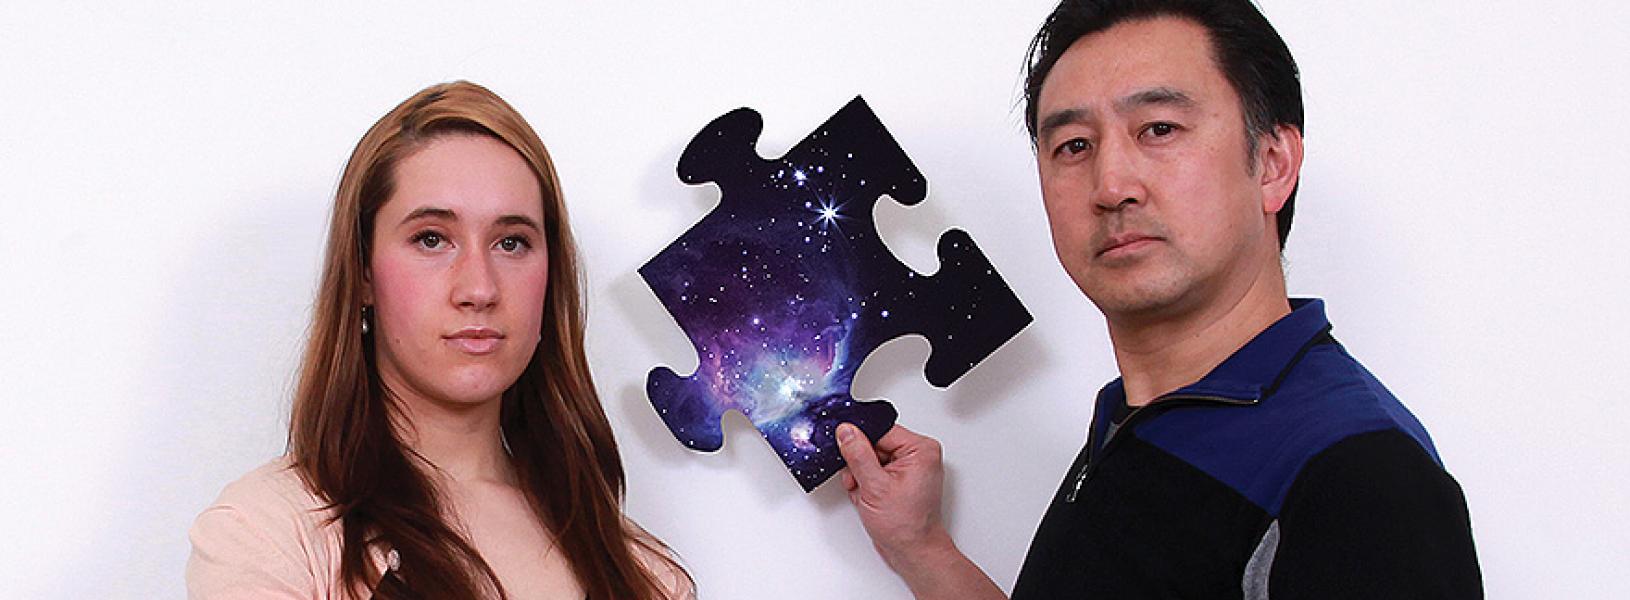 Jennifer Mauel and Mark Chen, holding a puzzle piece with a solar system image on it, posing for the camera.